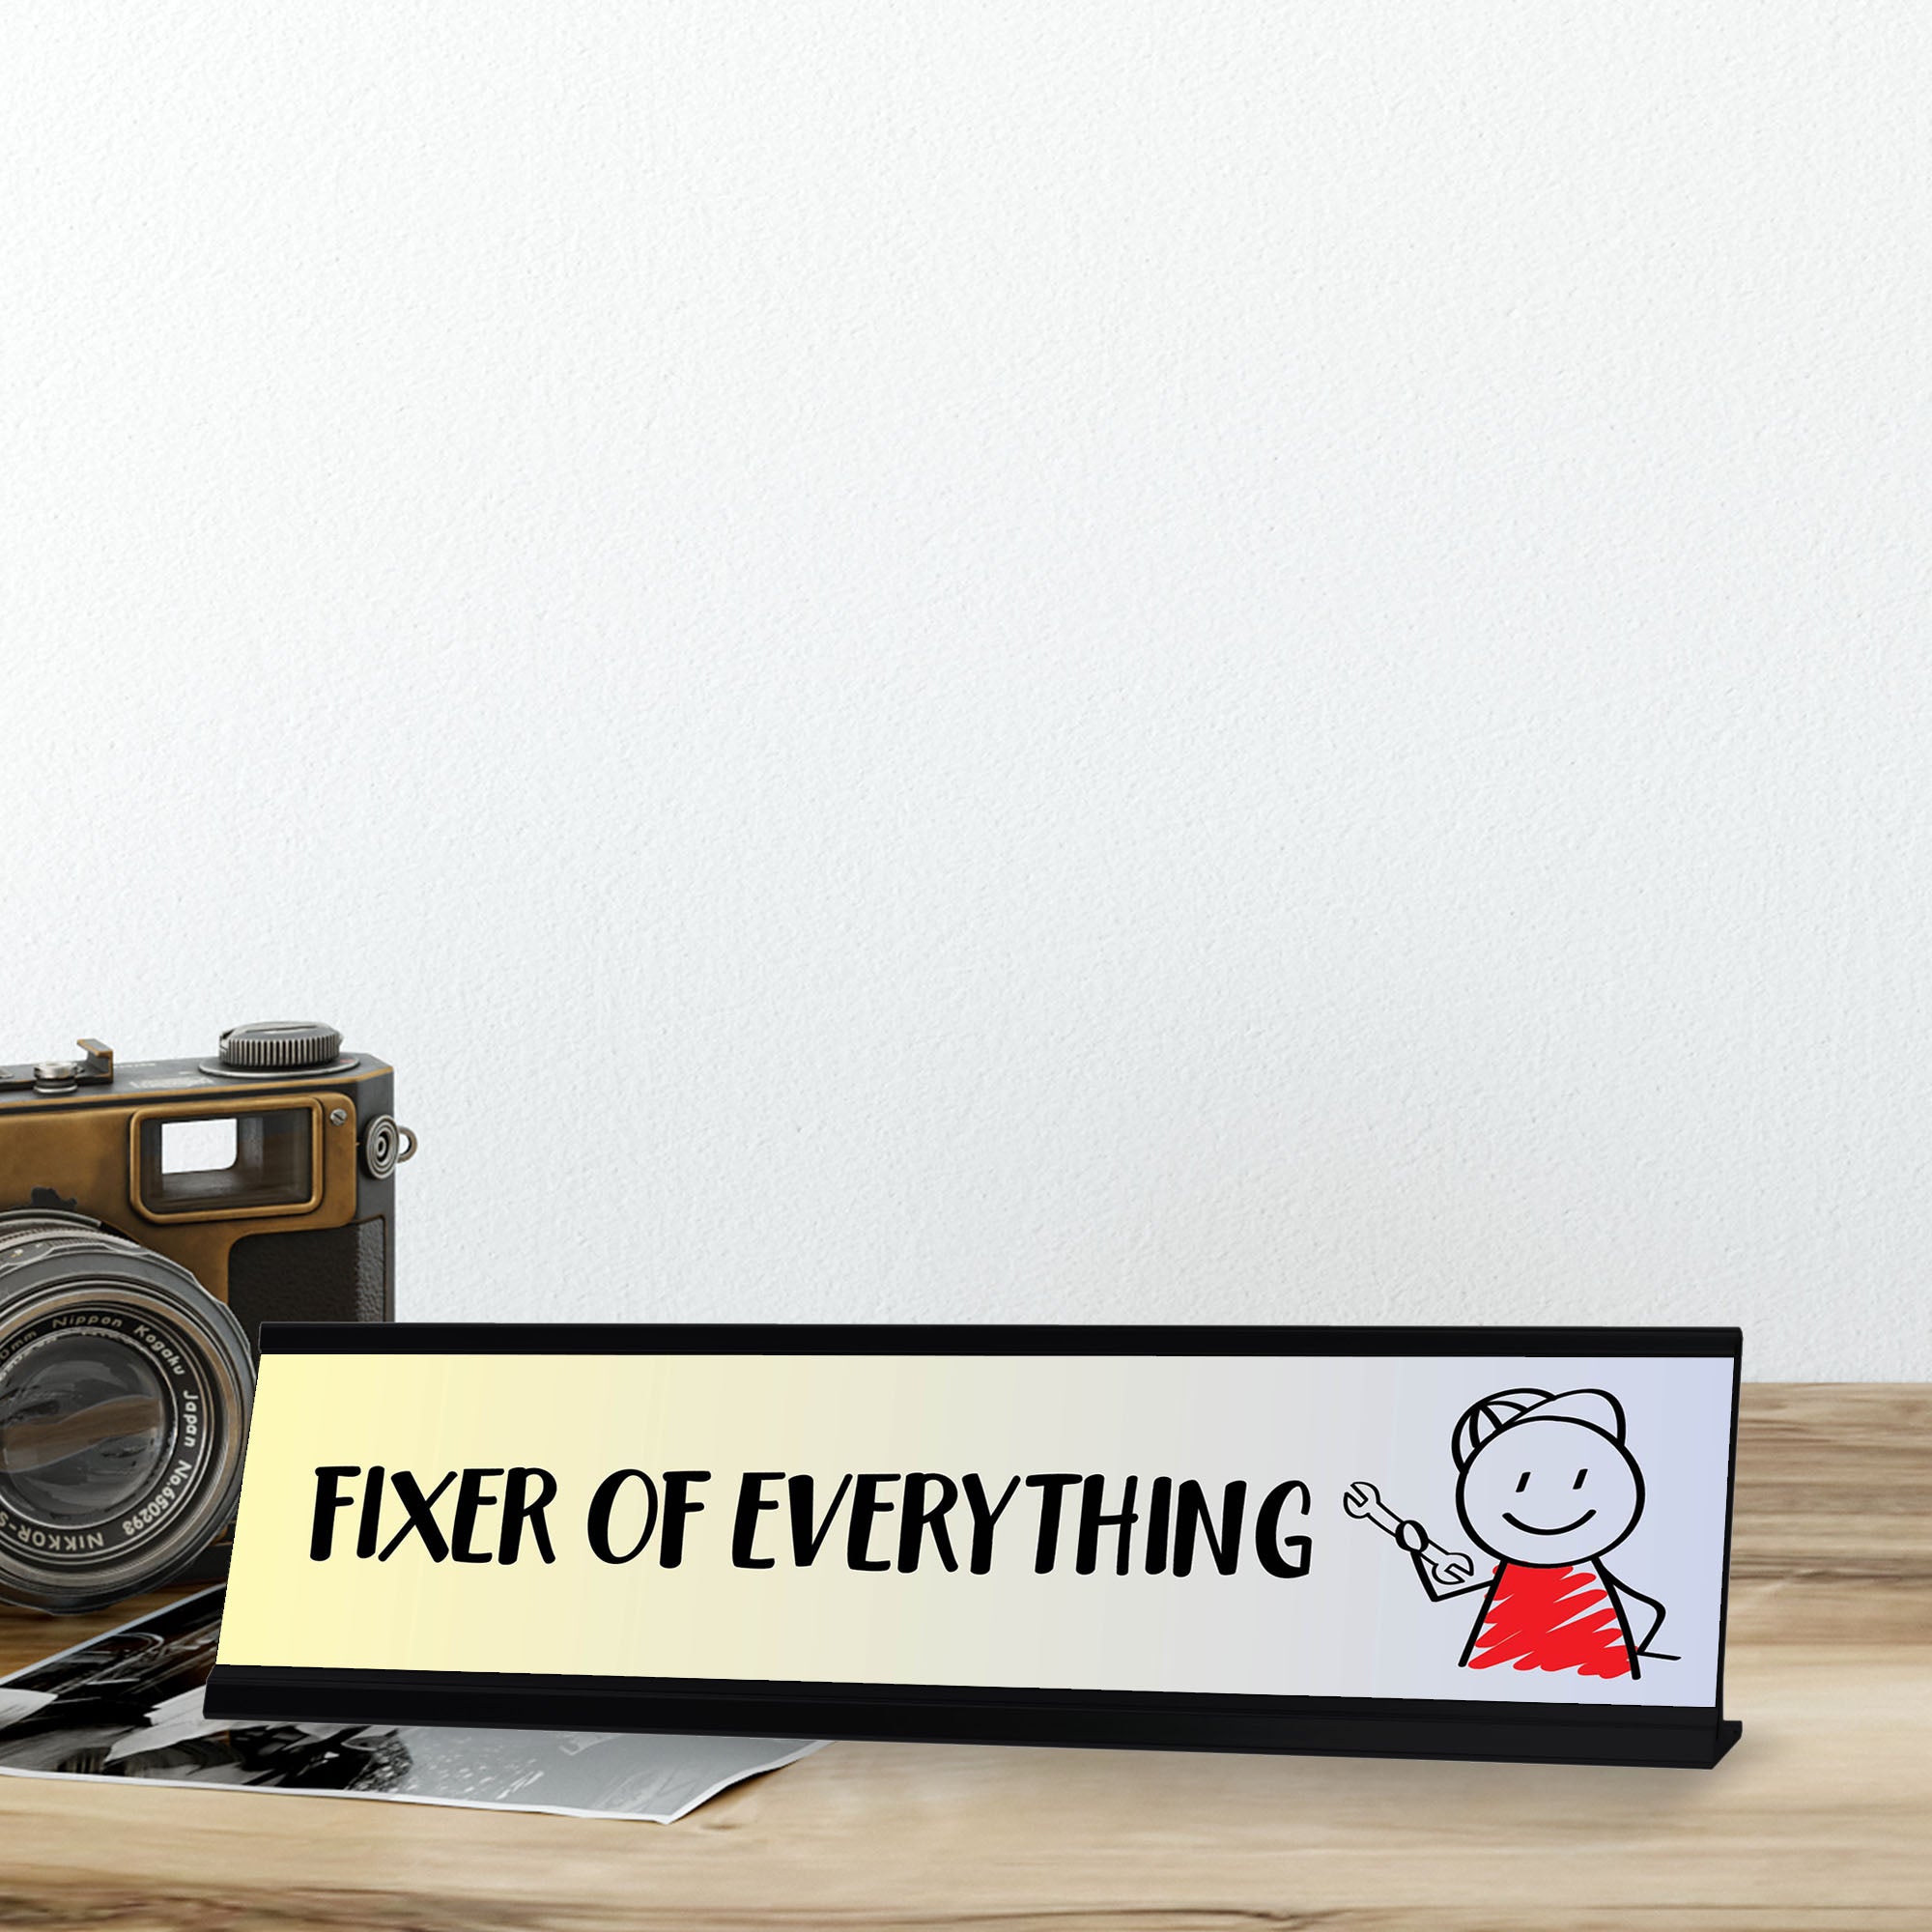 Fixer of Everything, Stick People Desk Sign, Novelty Nameplate (2 x 8")